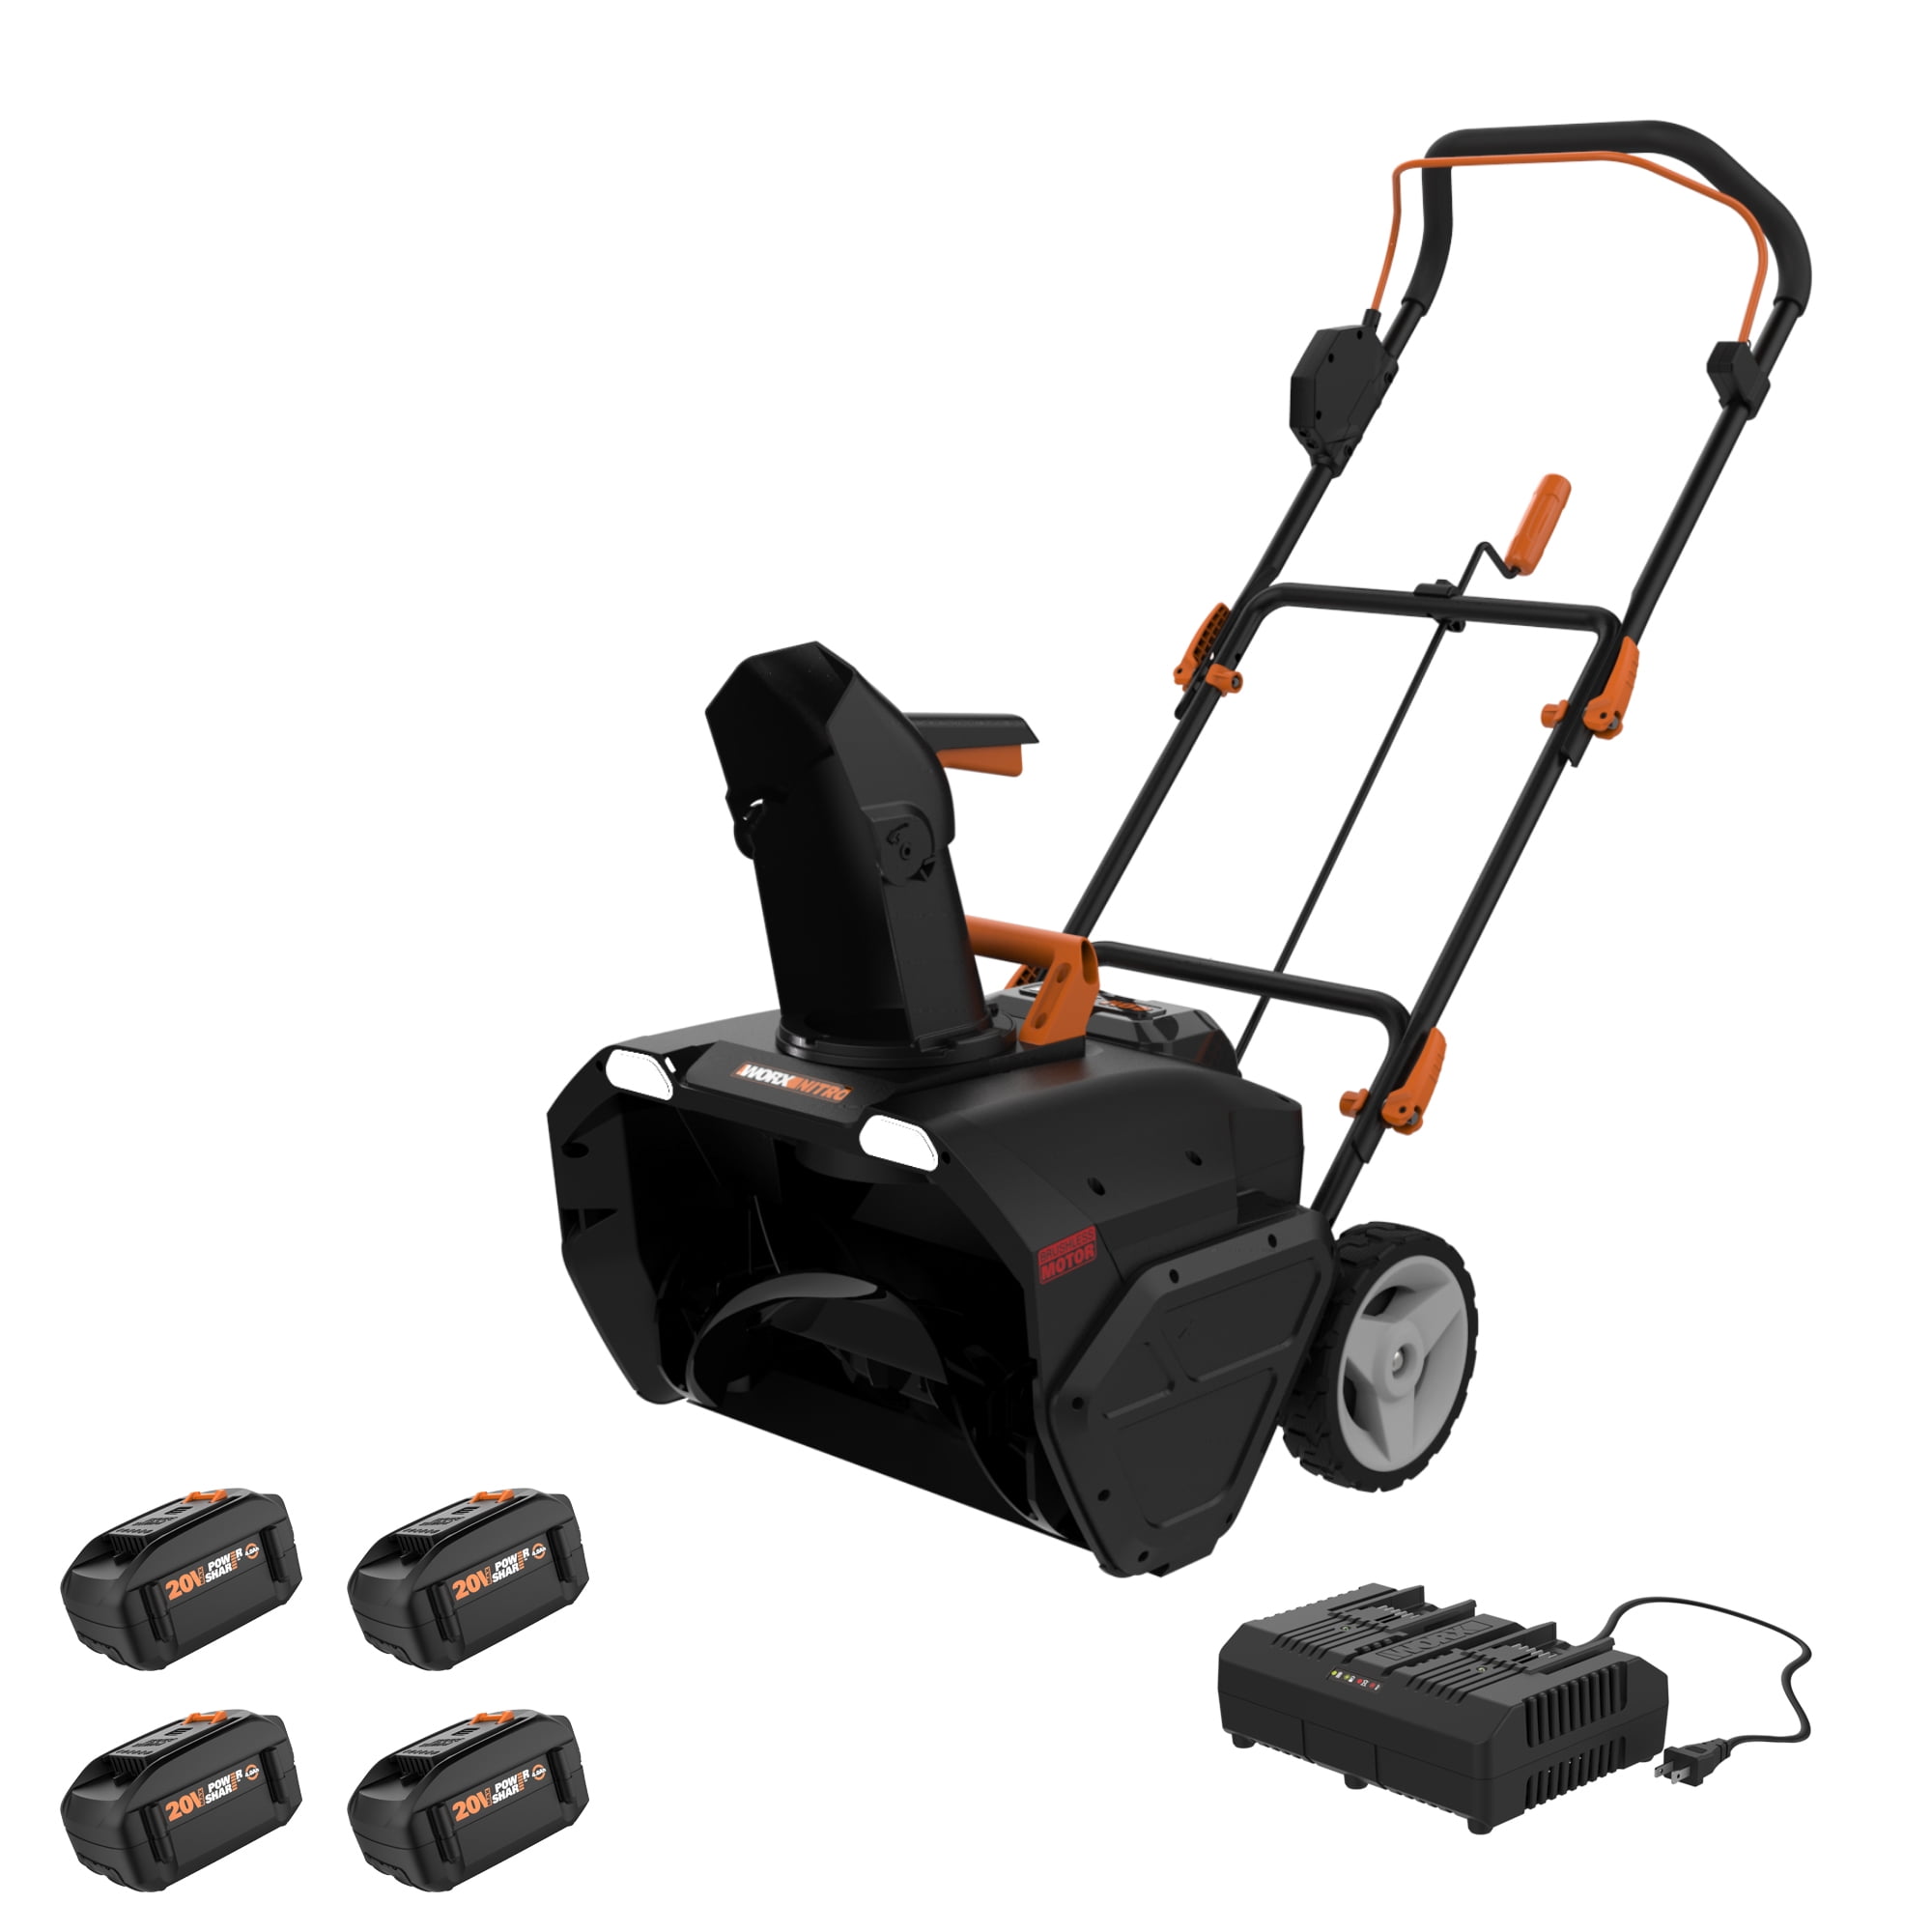 Worx 40V Power Share 20" Cordless Snow Blower with Brushless Motor, with 4 - 4Ah Batteries and Dual Quick Charger (2X the runtime compared to like models with only 2 batteries)